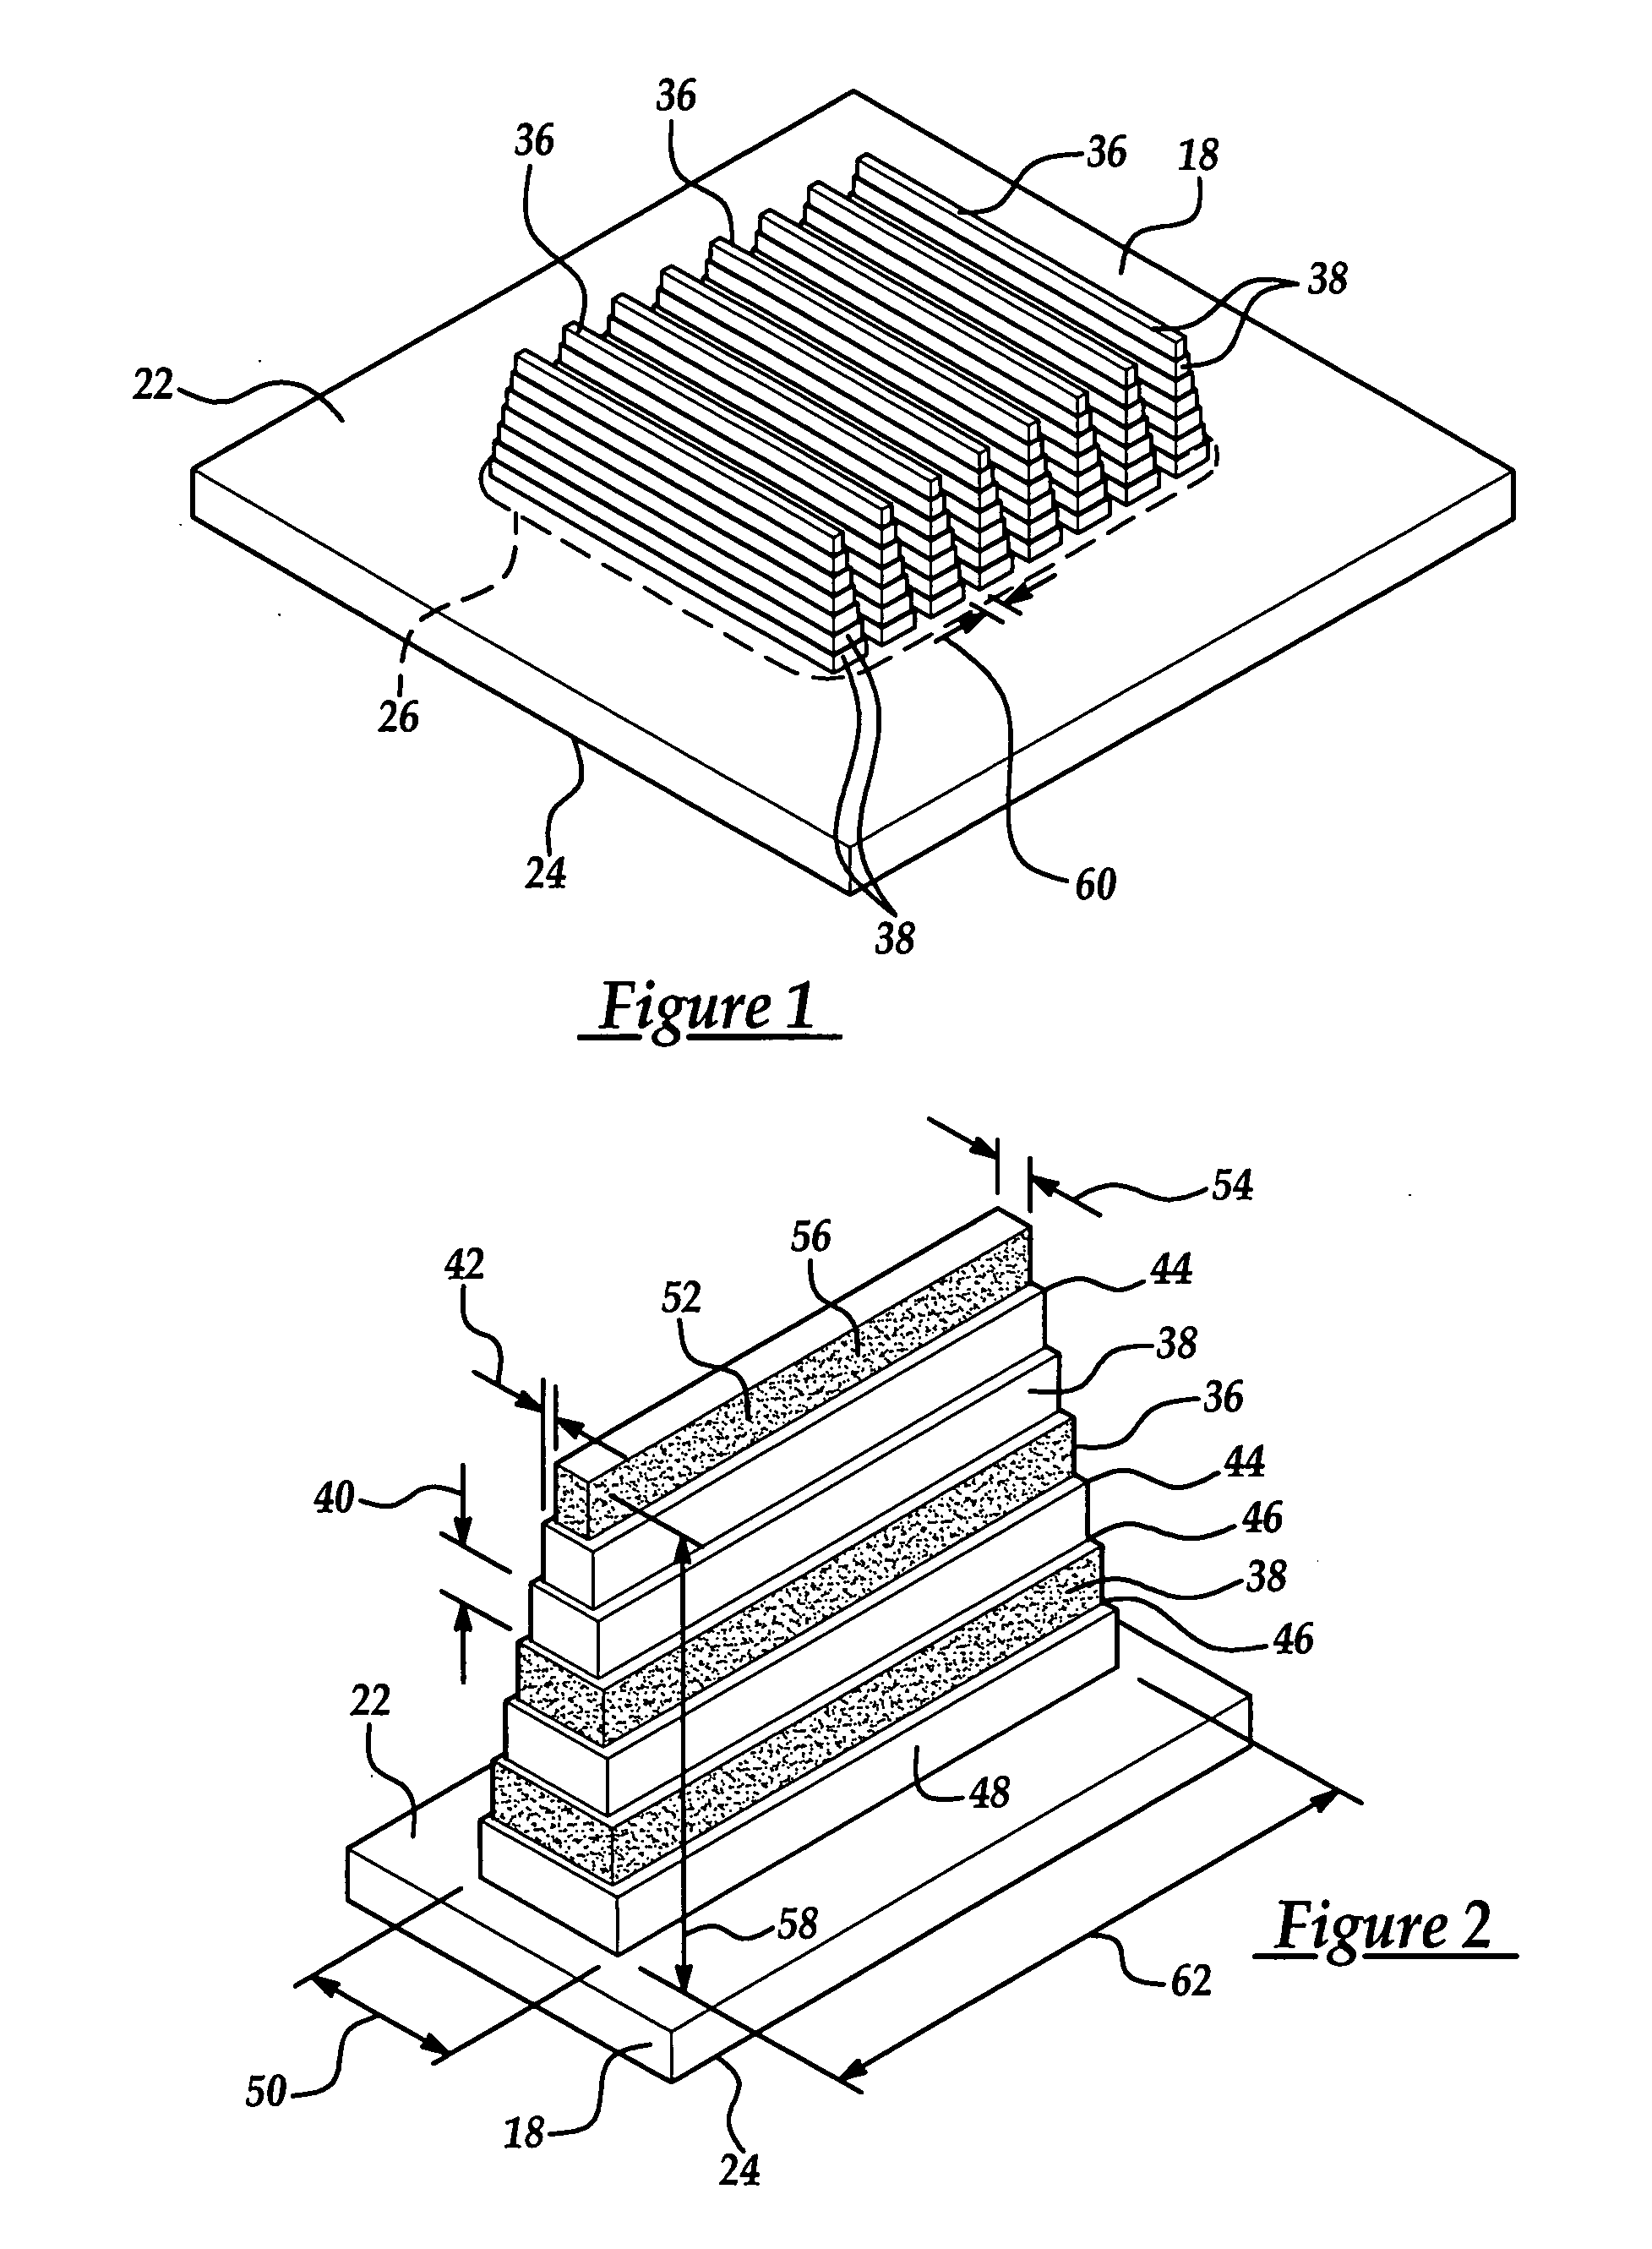 Heat dissipation element for cooling electronic devices